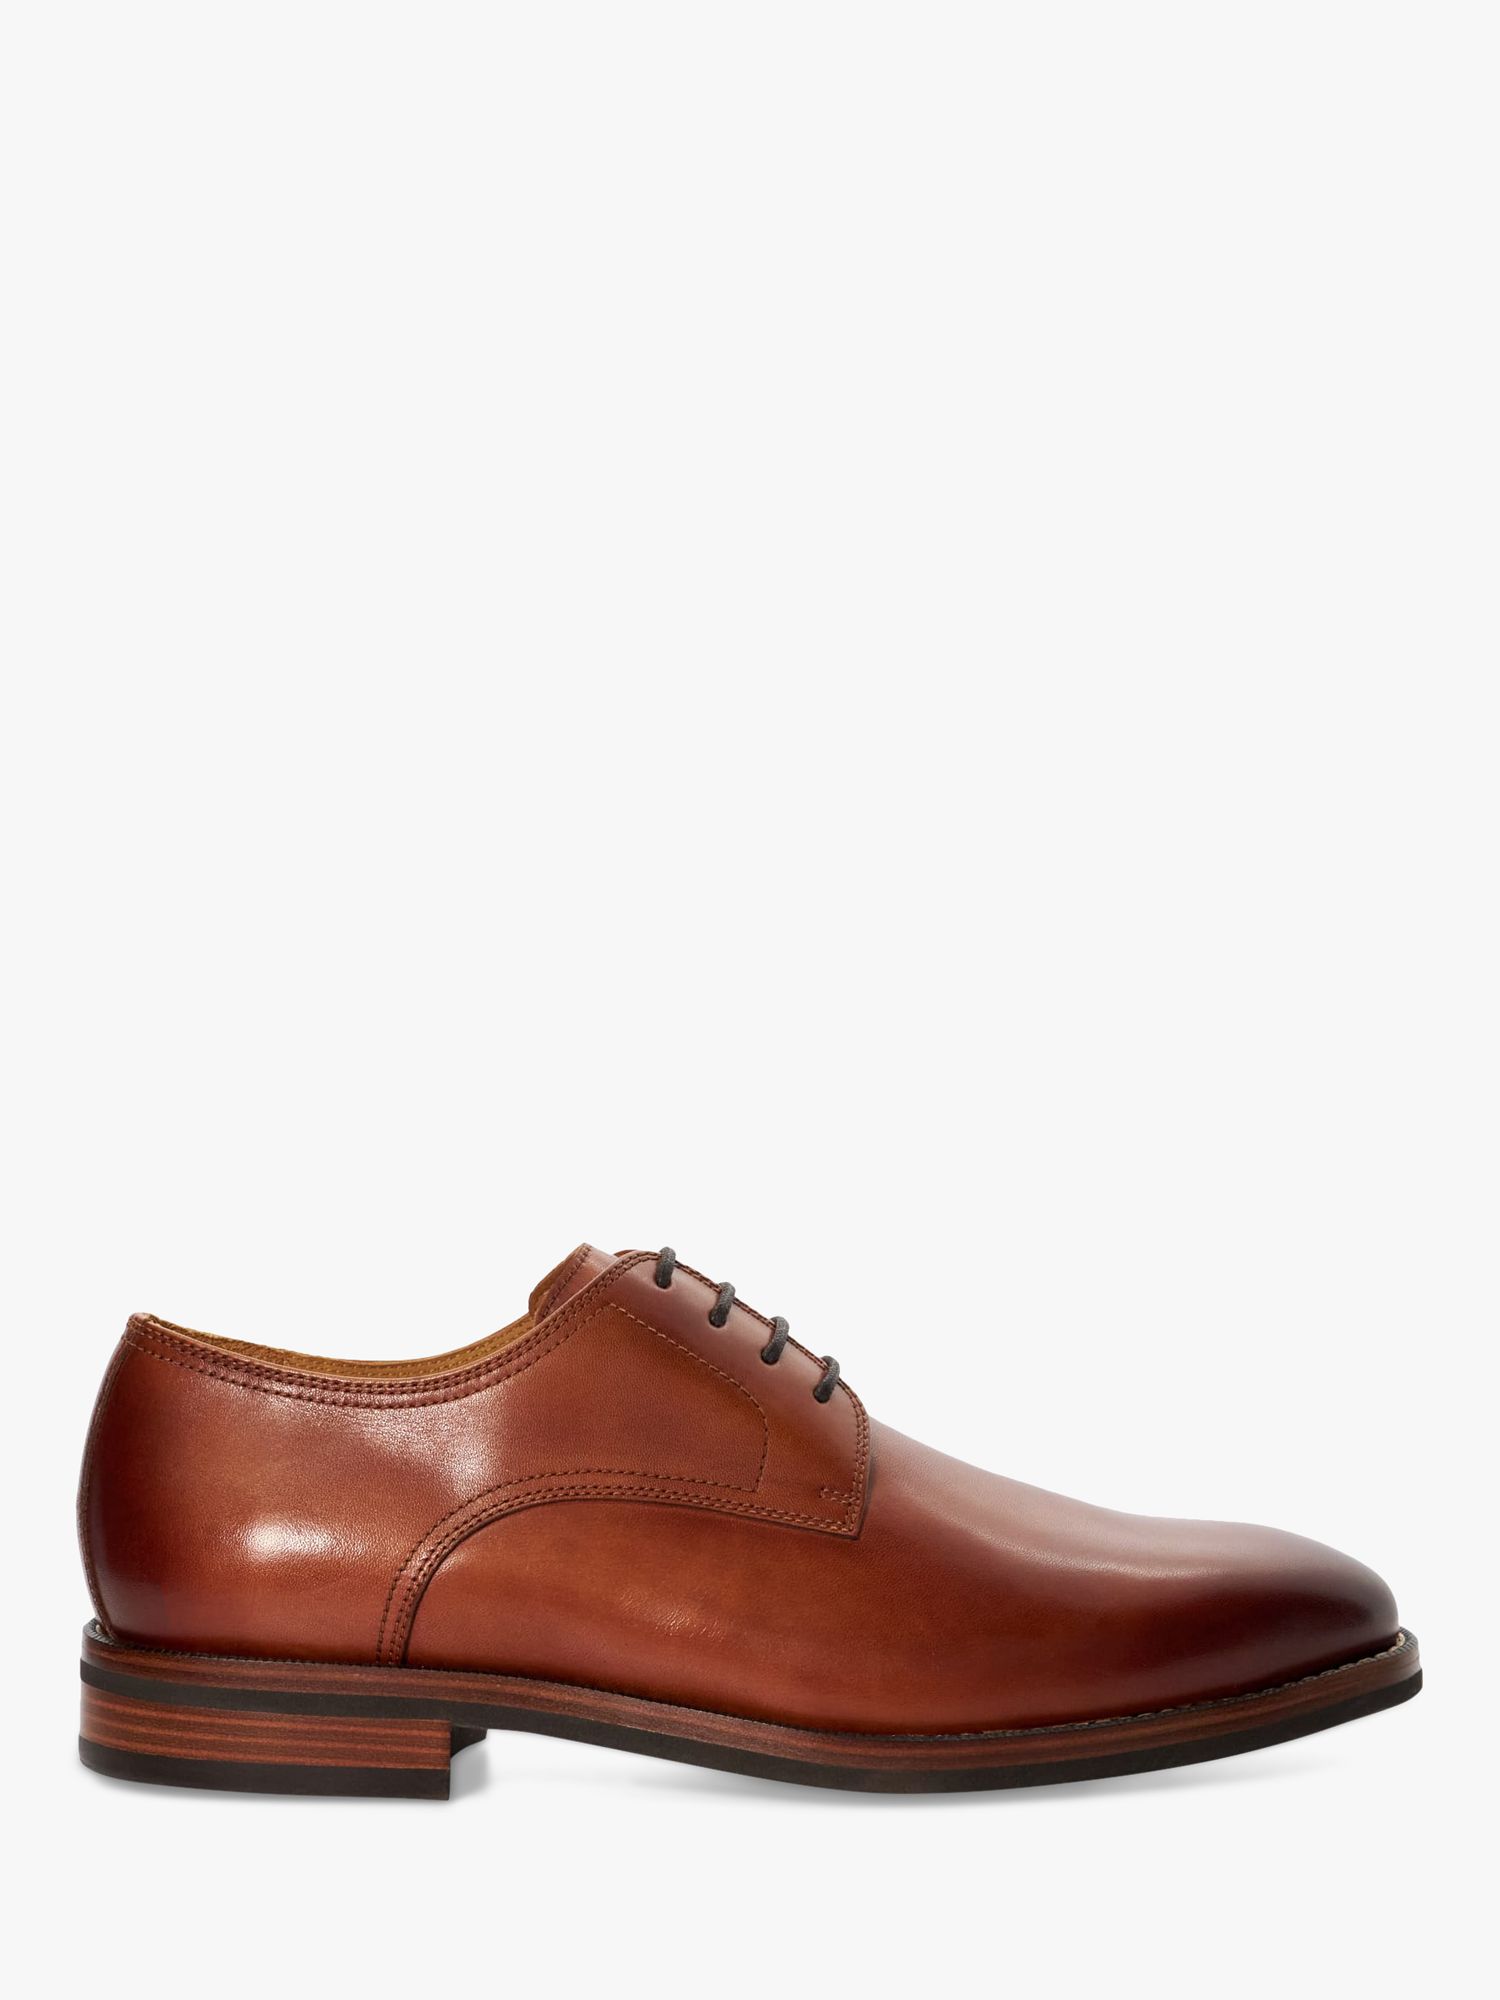 Dune Sinclairs Lace Up Gibson Shoes, Tan at John Lewis & Partners